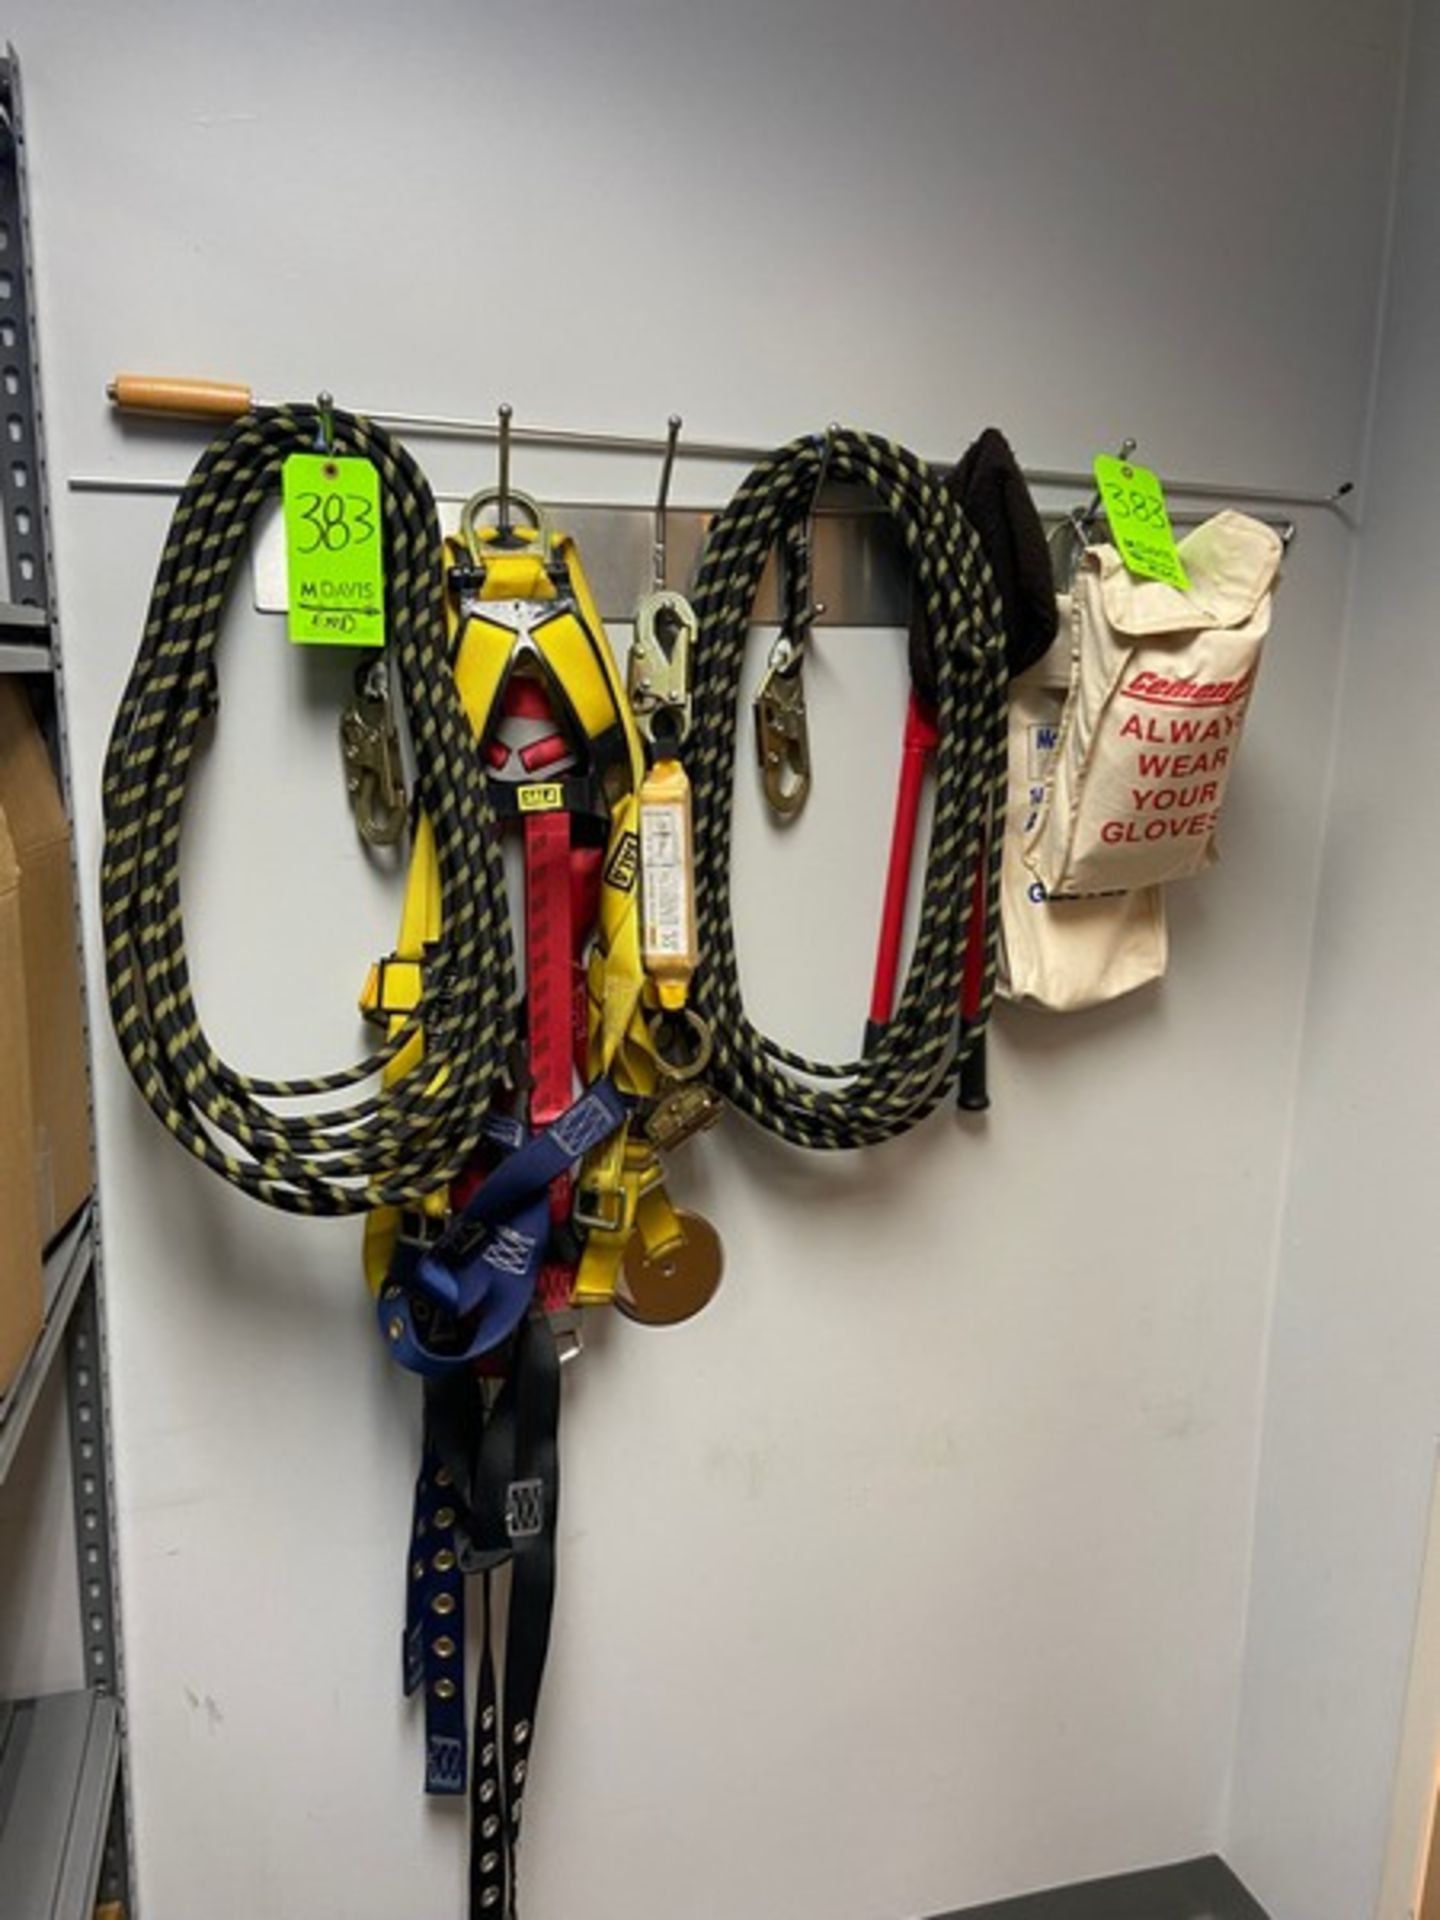 SAFETY HARNESSES & GEAR, INCLUDES S/S COAT HANGER